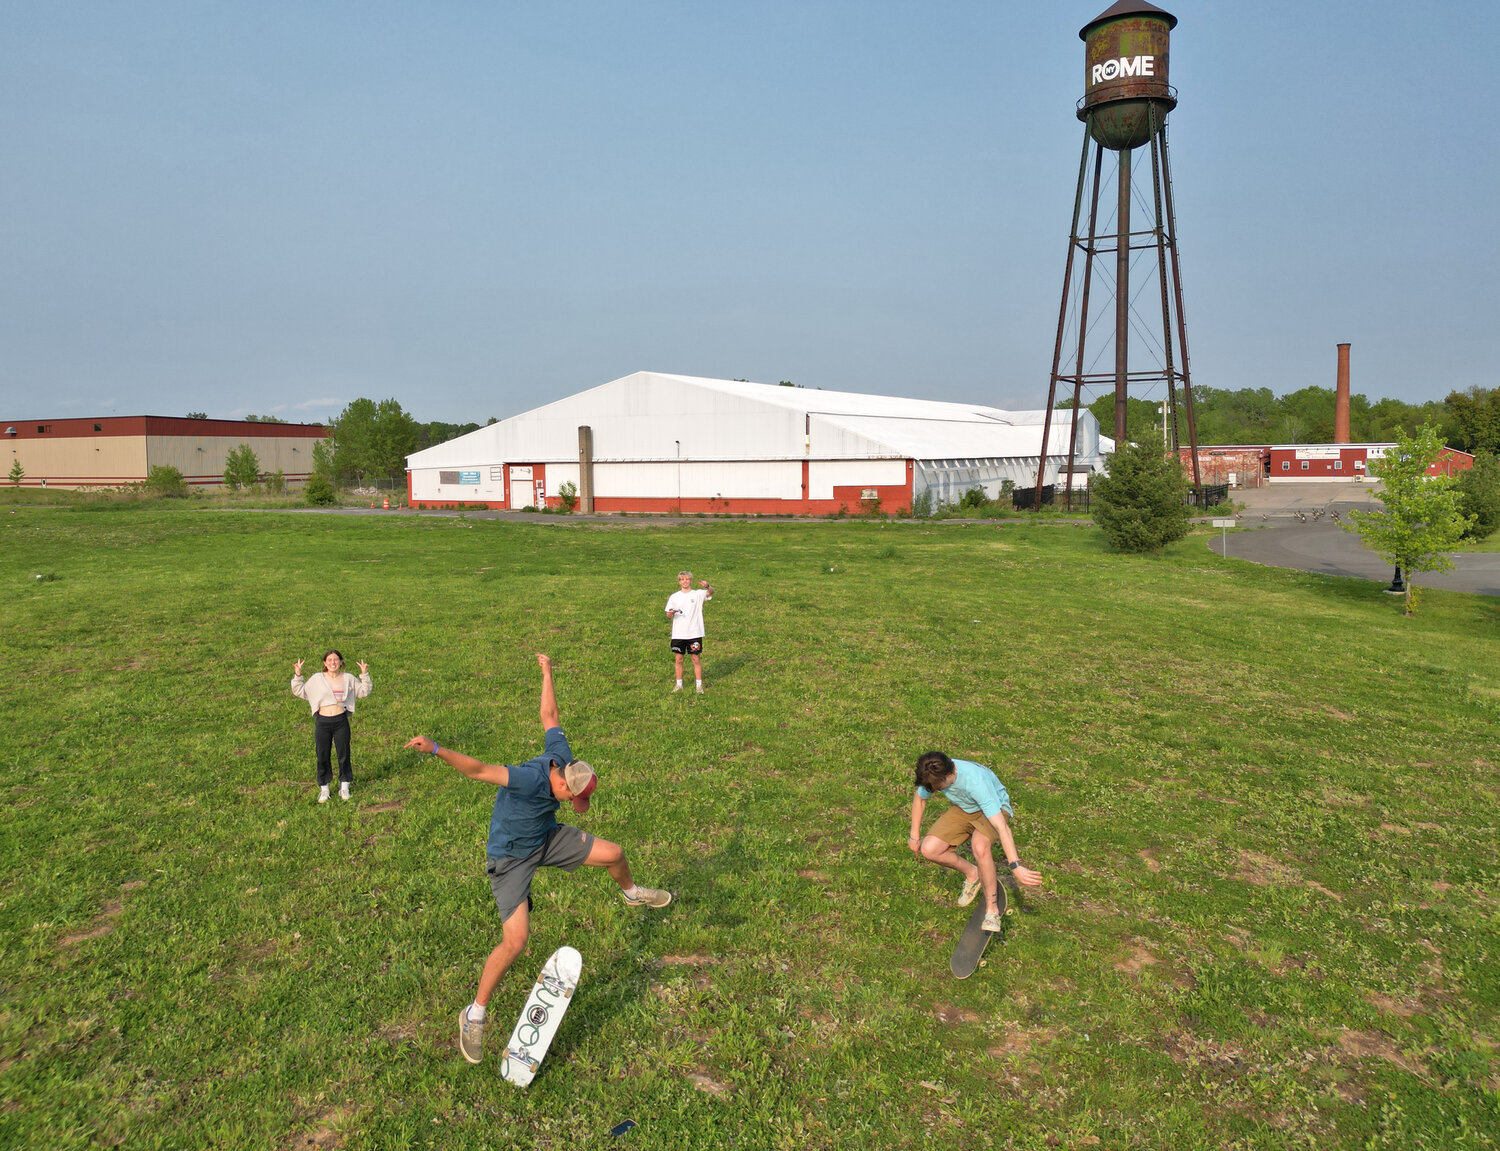 The planned skatepark in Rome to memorialize Stone Mercurio would sit in part of this vacant, city-owned parcel between Harbor Way and Mill Street. The city’s navigation center for the Erie Canal borders another side. From left: Stone’s sister Carmella, and his friends Hayden McMonagle, Mikey Futia and Brandon Gannon.